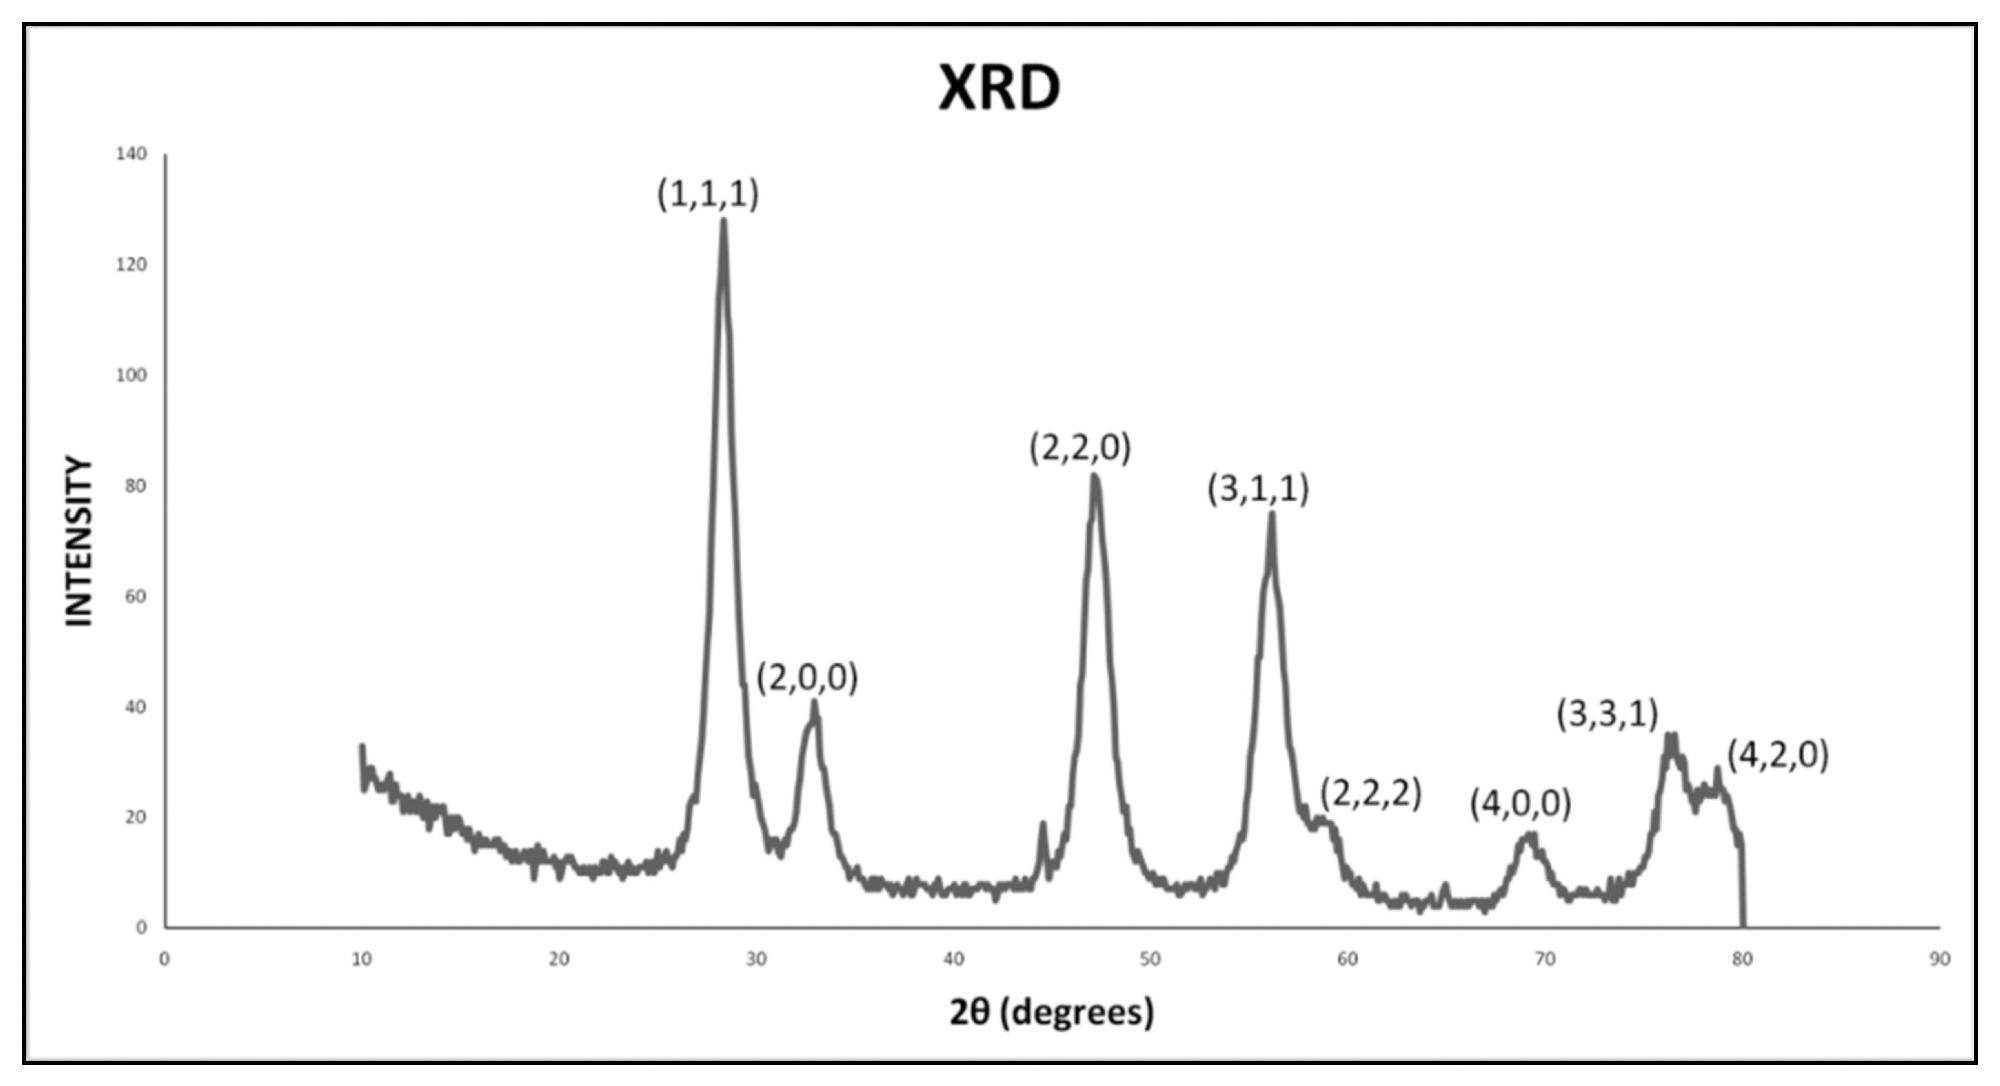 X-ray Diffraction Spectroscopy (XRD) spectrum representing the crystal planes corresponding to the crystal structure of CeO2.